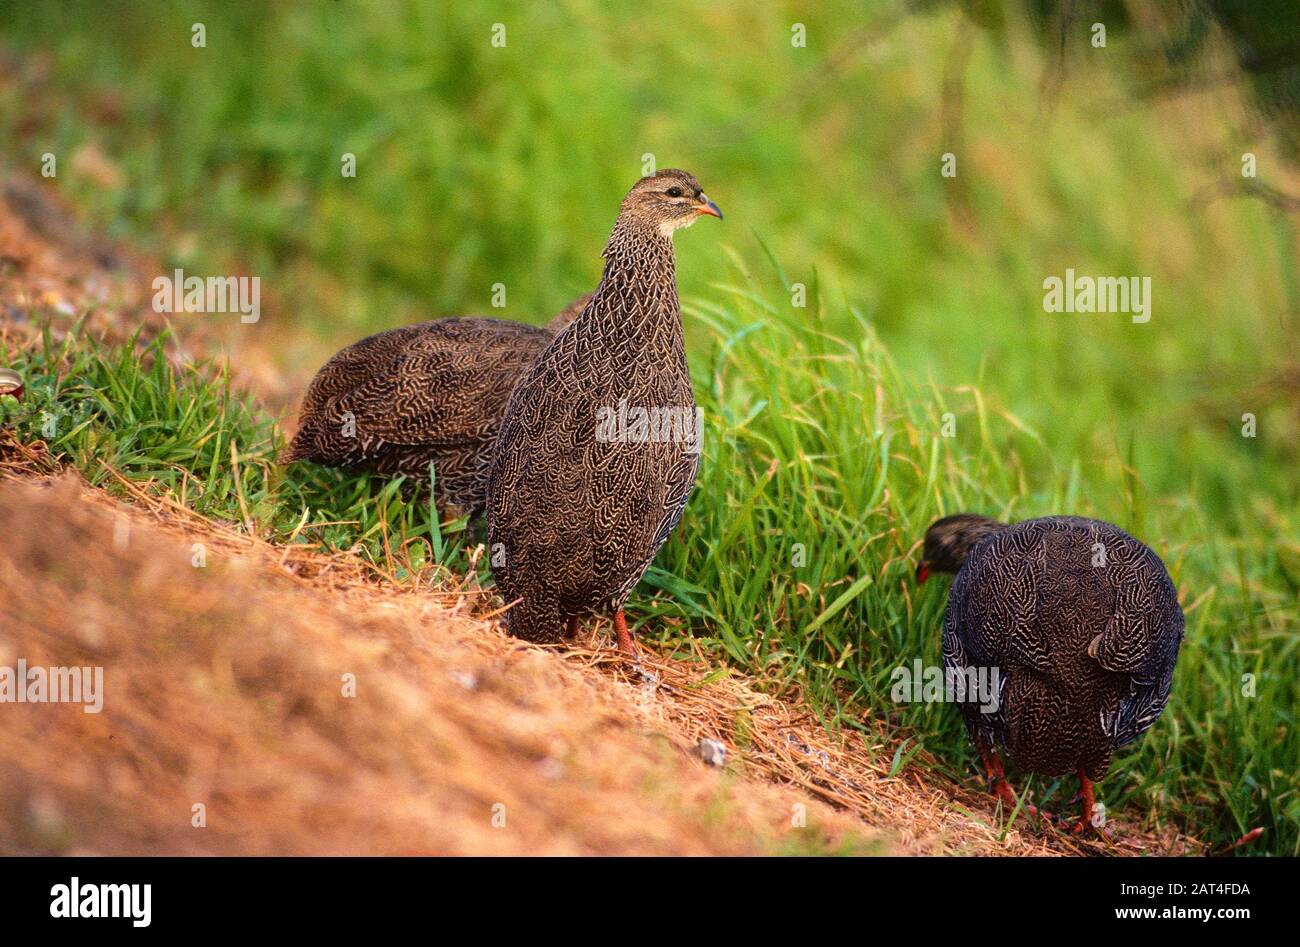 Cape Francolin, Francolinus capensis, Phasianidae, bird, animal, Cape of Good Hope, South Africa Stock Photo